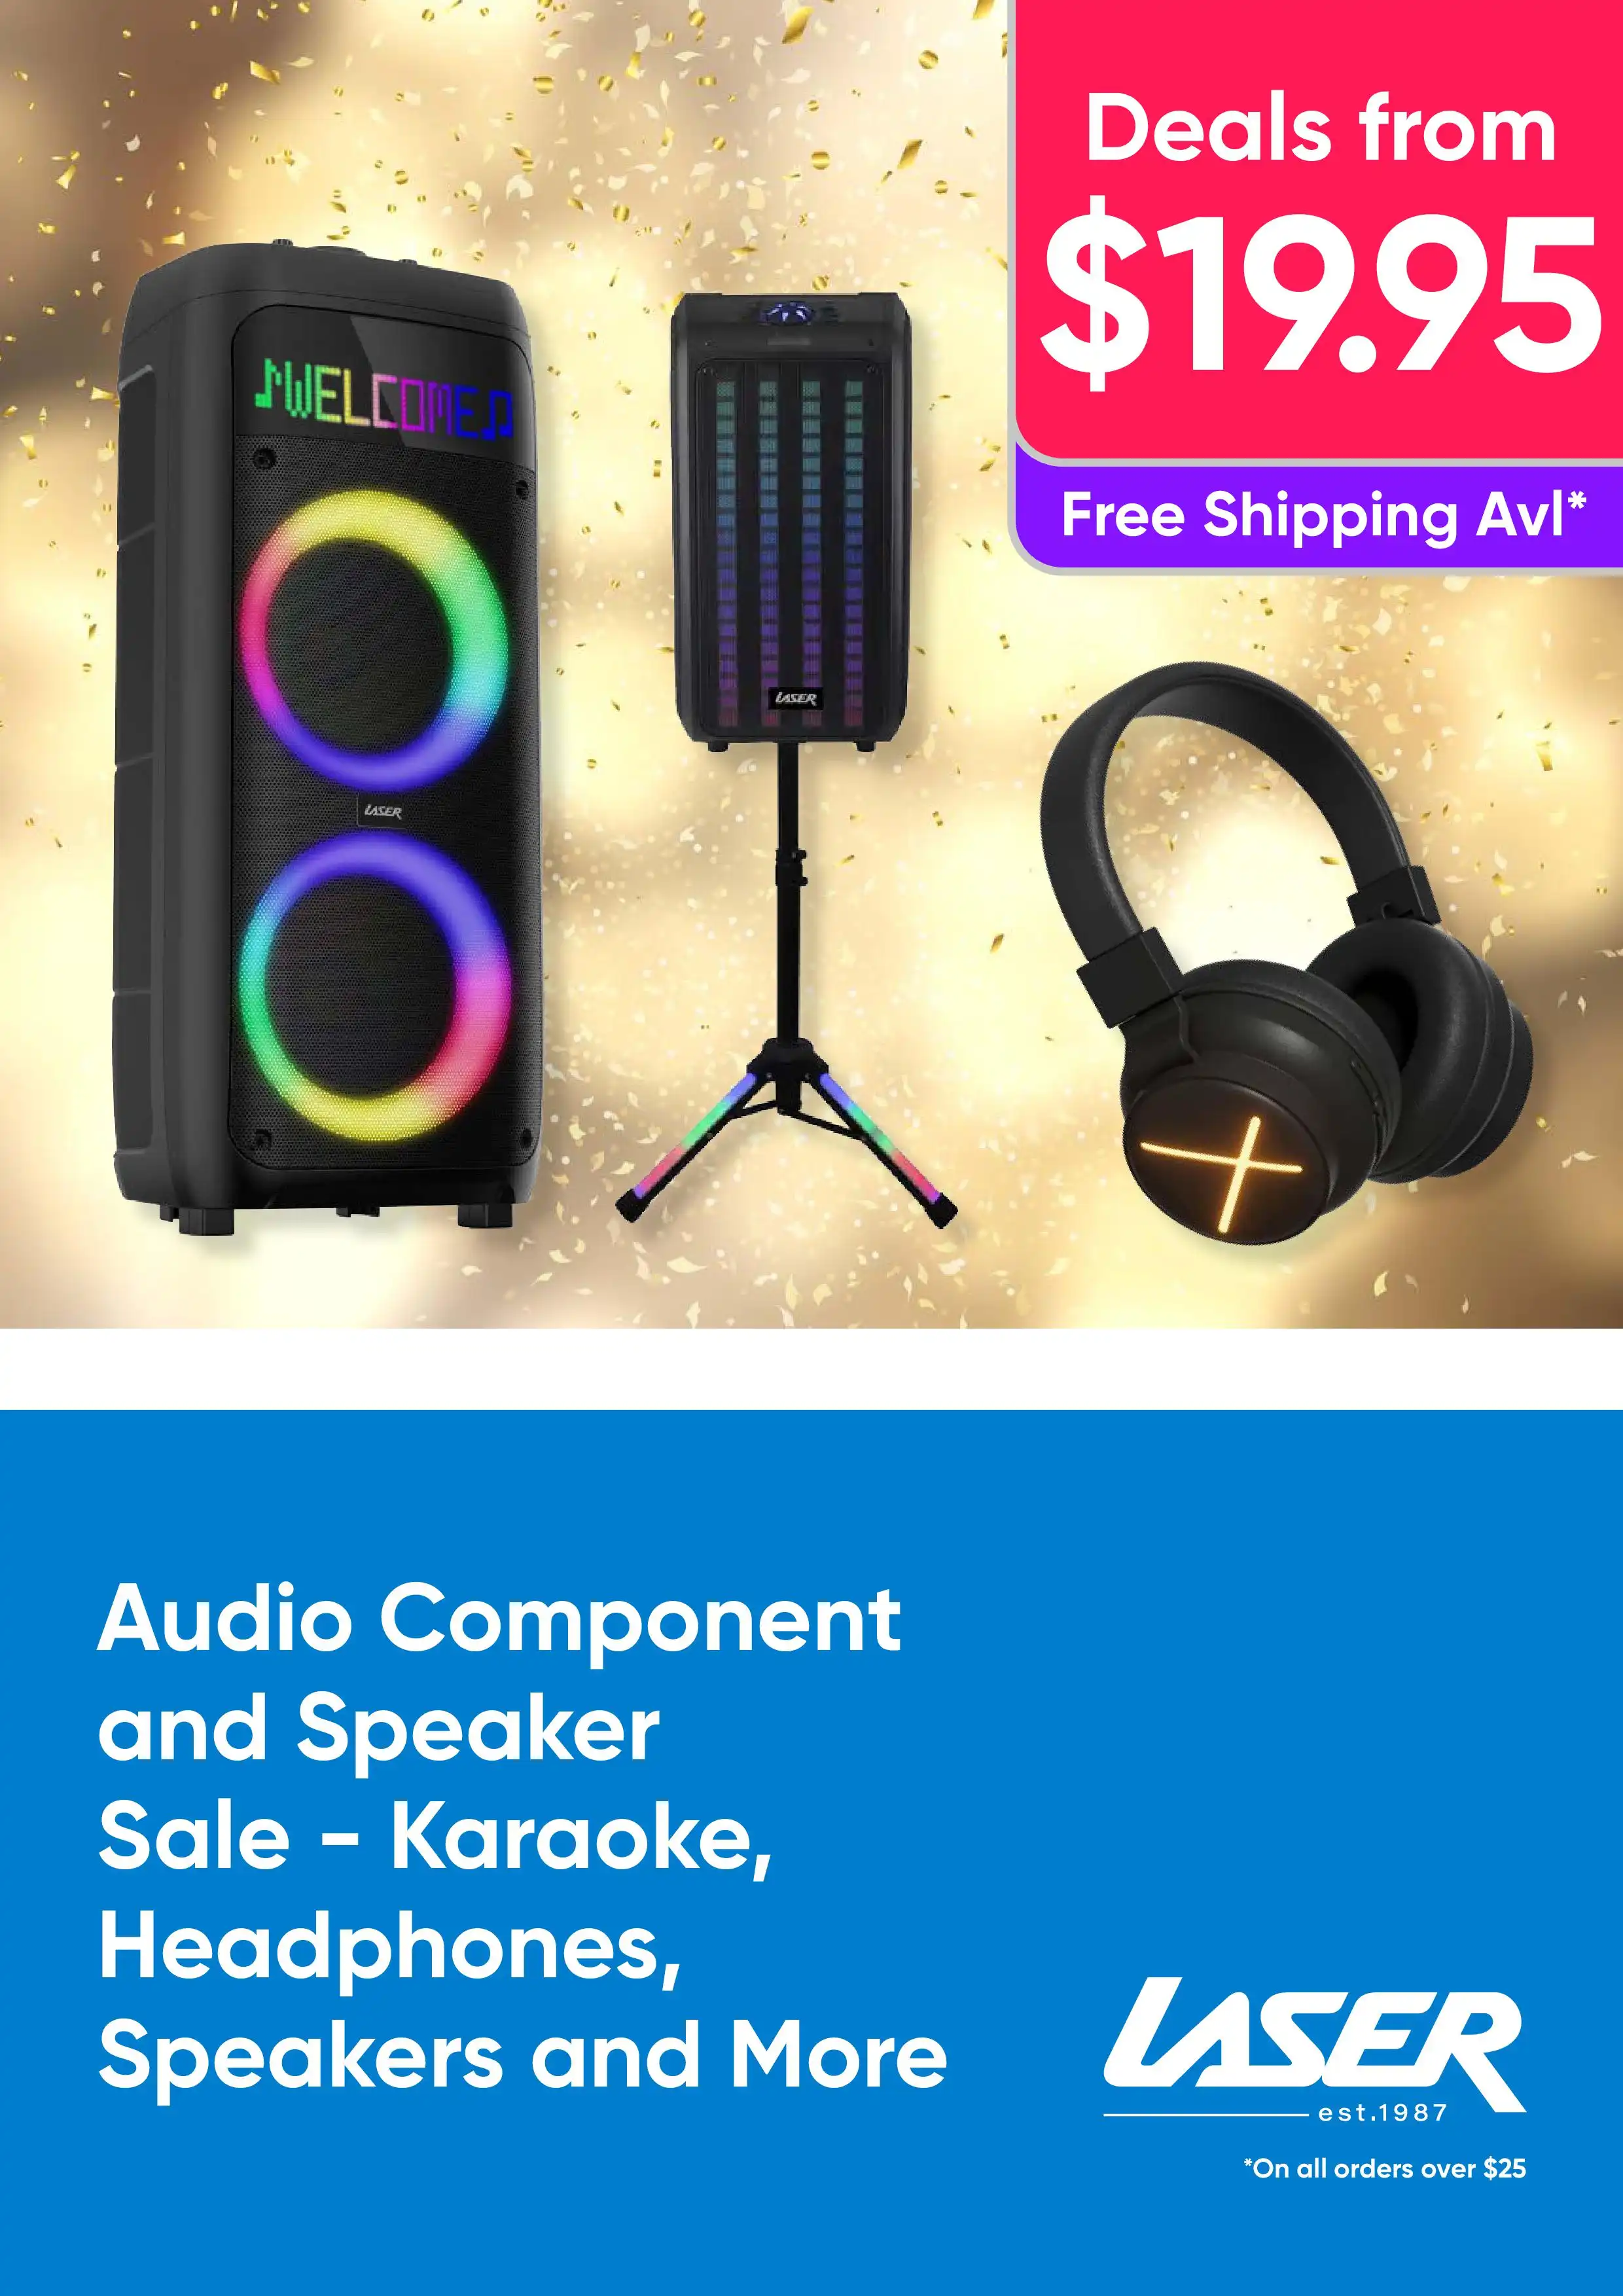 Save on a Range of Audio Components and Speakers - Shop Karaoke, Headphones, Speakers and More